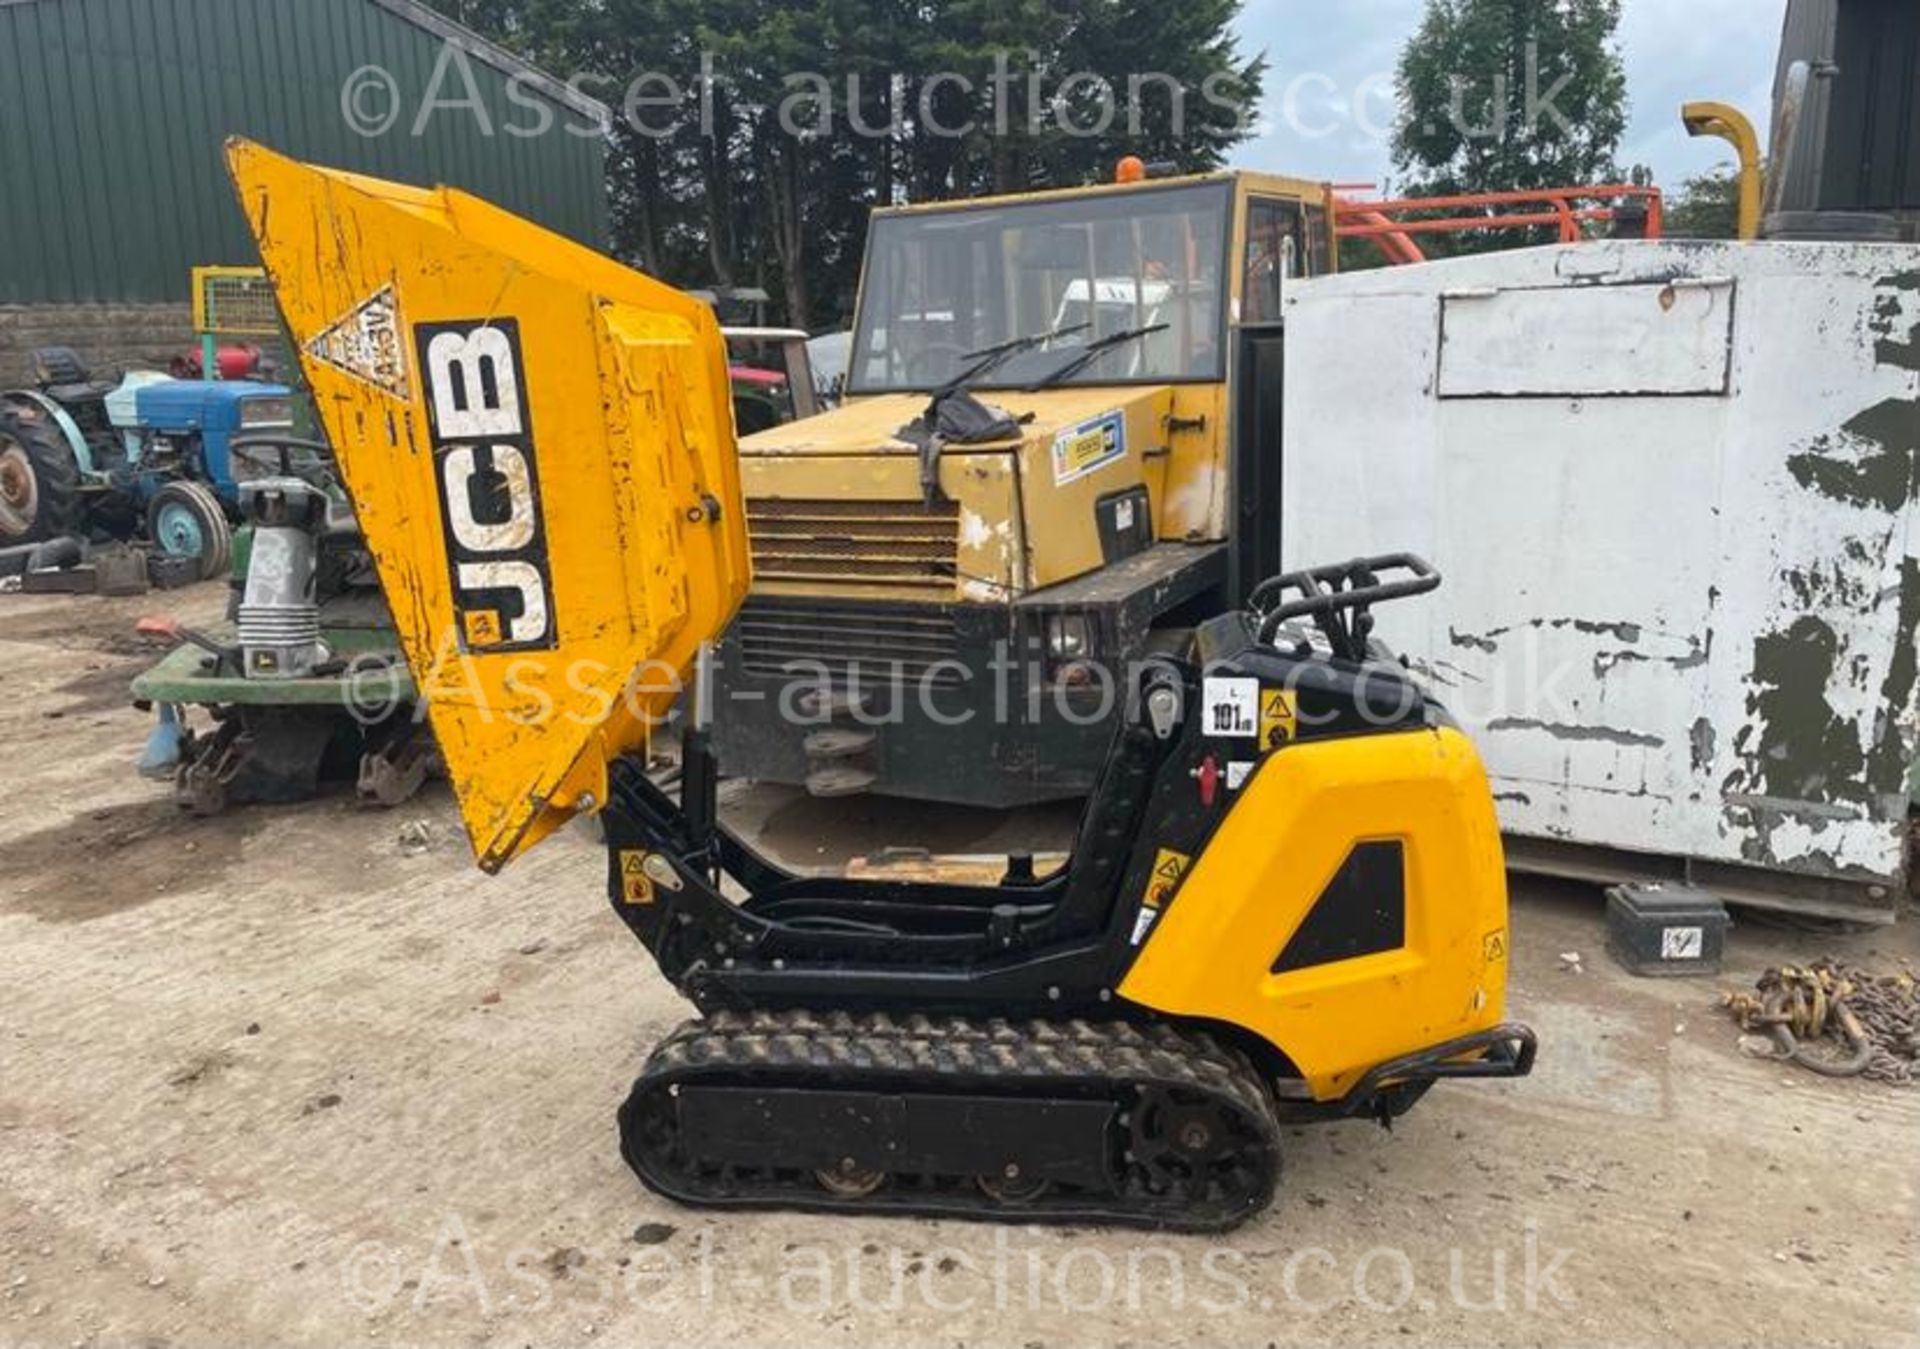 2019 JCB HTD-5 DIESEL TRACKED DUMPER, RUNS DRIVES AND WORKS WELL, ELECTRIC OR PULL START *PLUS VAT* - Image 3 of 20